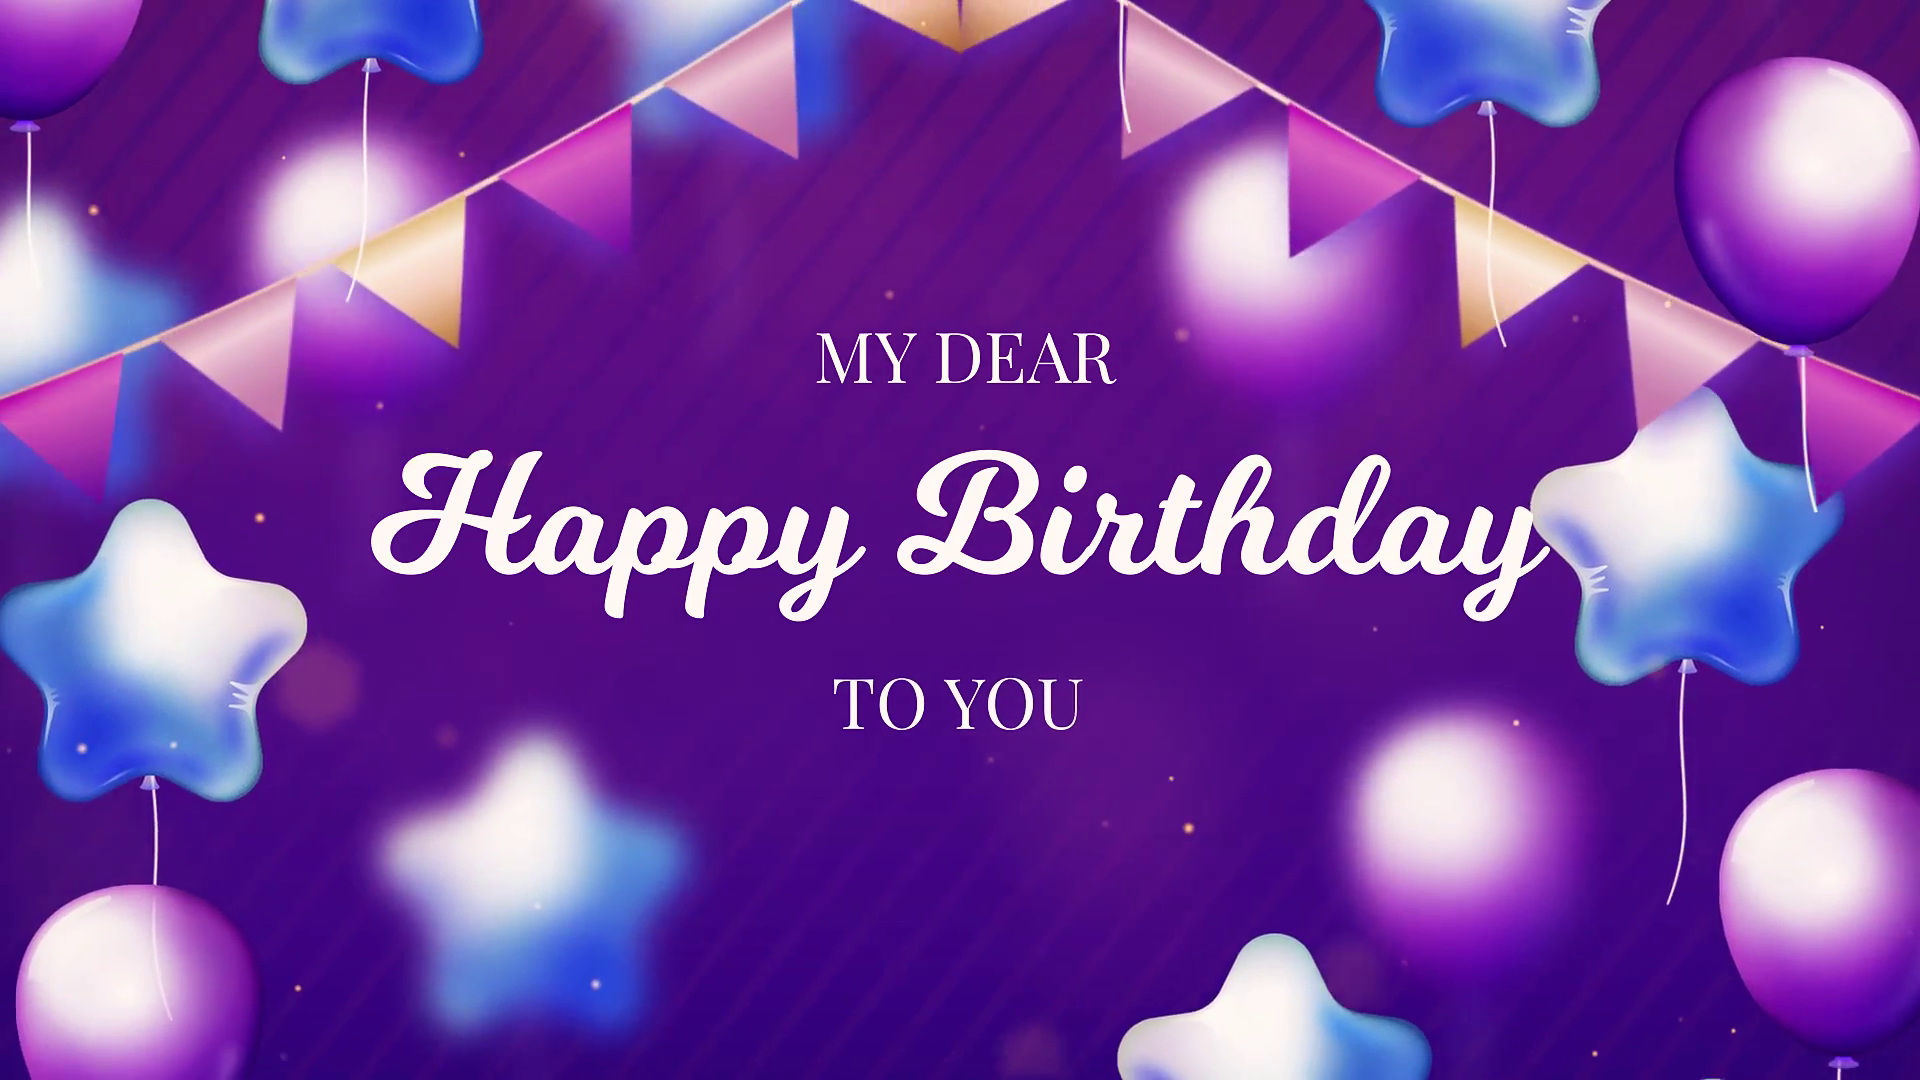 Videohive Happy Birthday 4 – Free After Effects Template Downloads